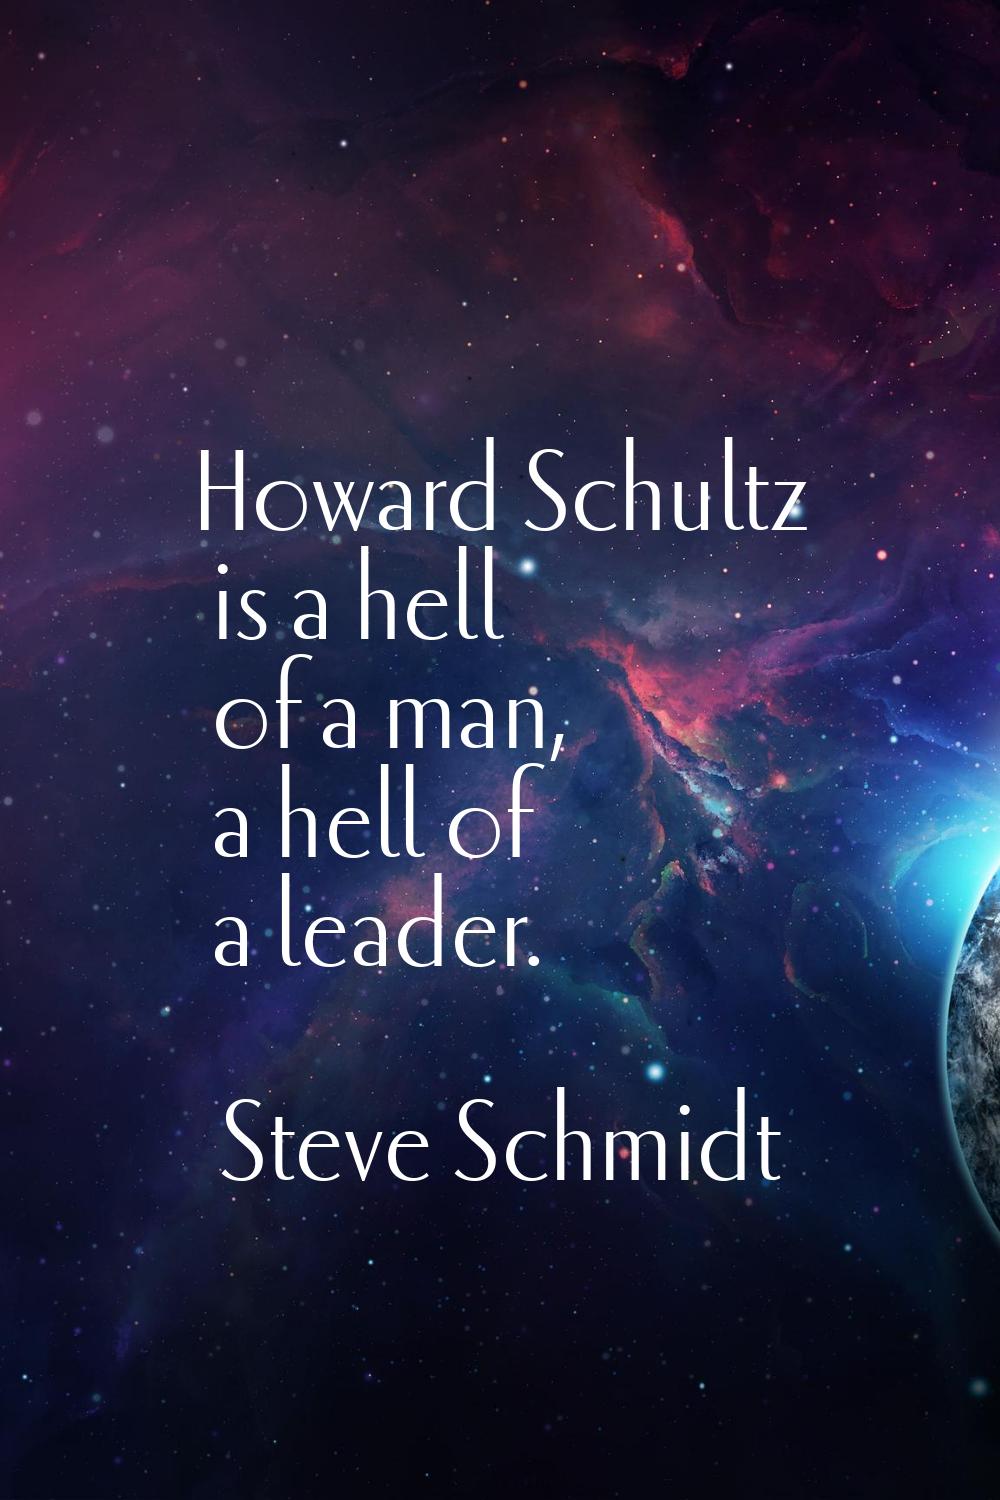 Howard Schultz is a hell of a man, a hell of a leader.